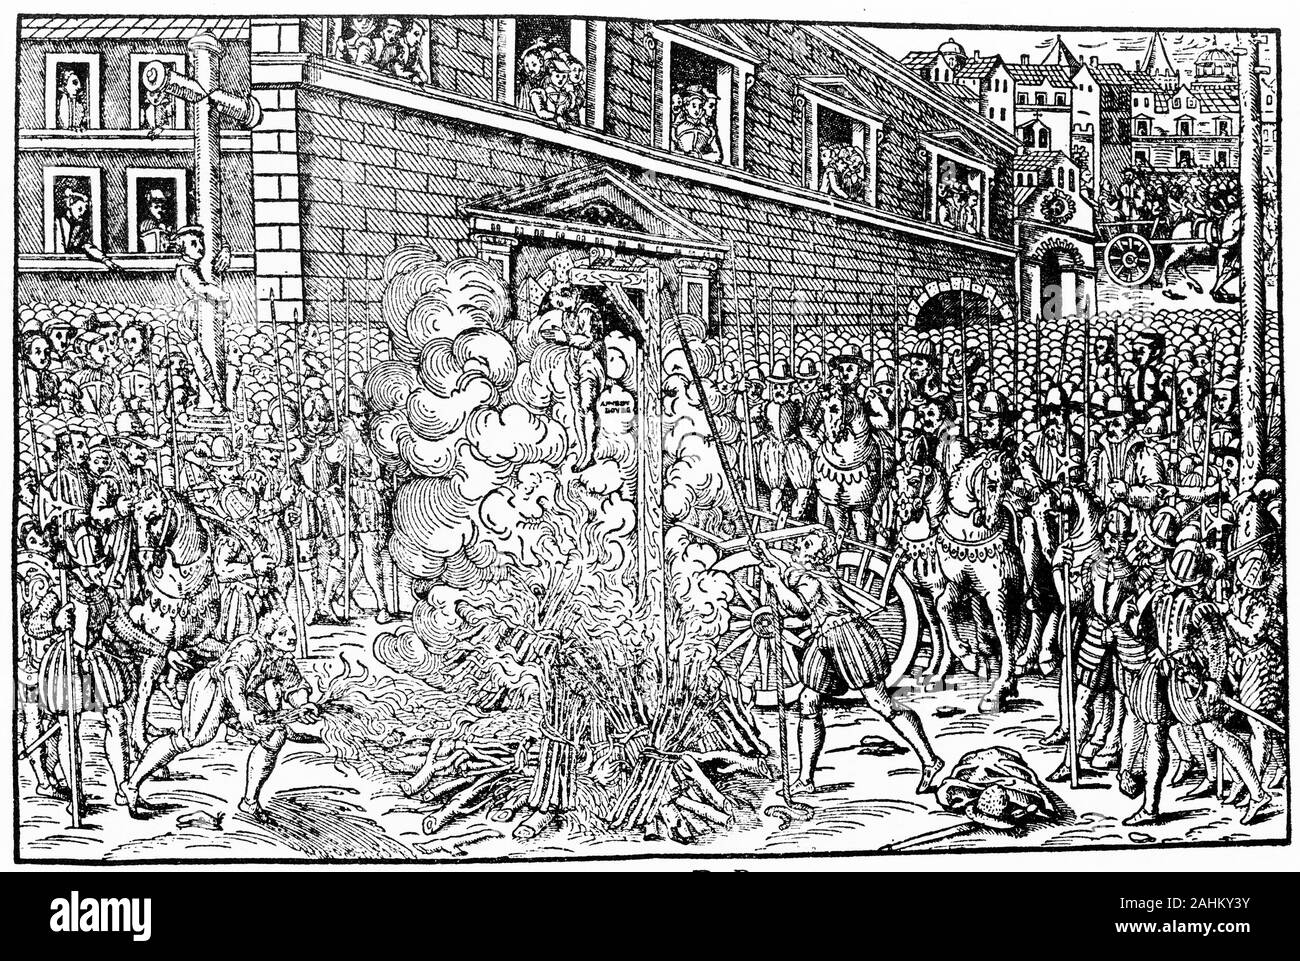 Engraving of the Protestant magistrate Anne du Bourg (1521-1559) being tortured and hanged by the Catholics in the place Saint-Jean en Greve, Paris, 21.12.1559. du Bourg was a French magistrate and nephew of the chancellor Antoine du Bourg. Stock Photo